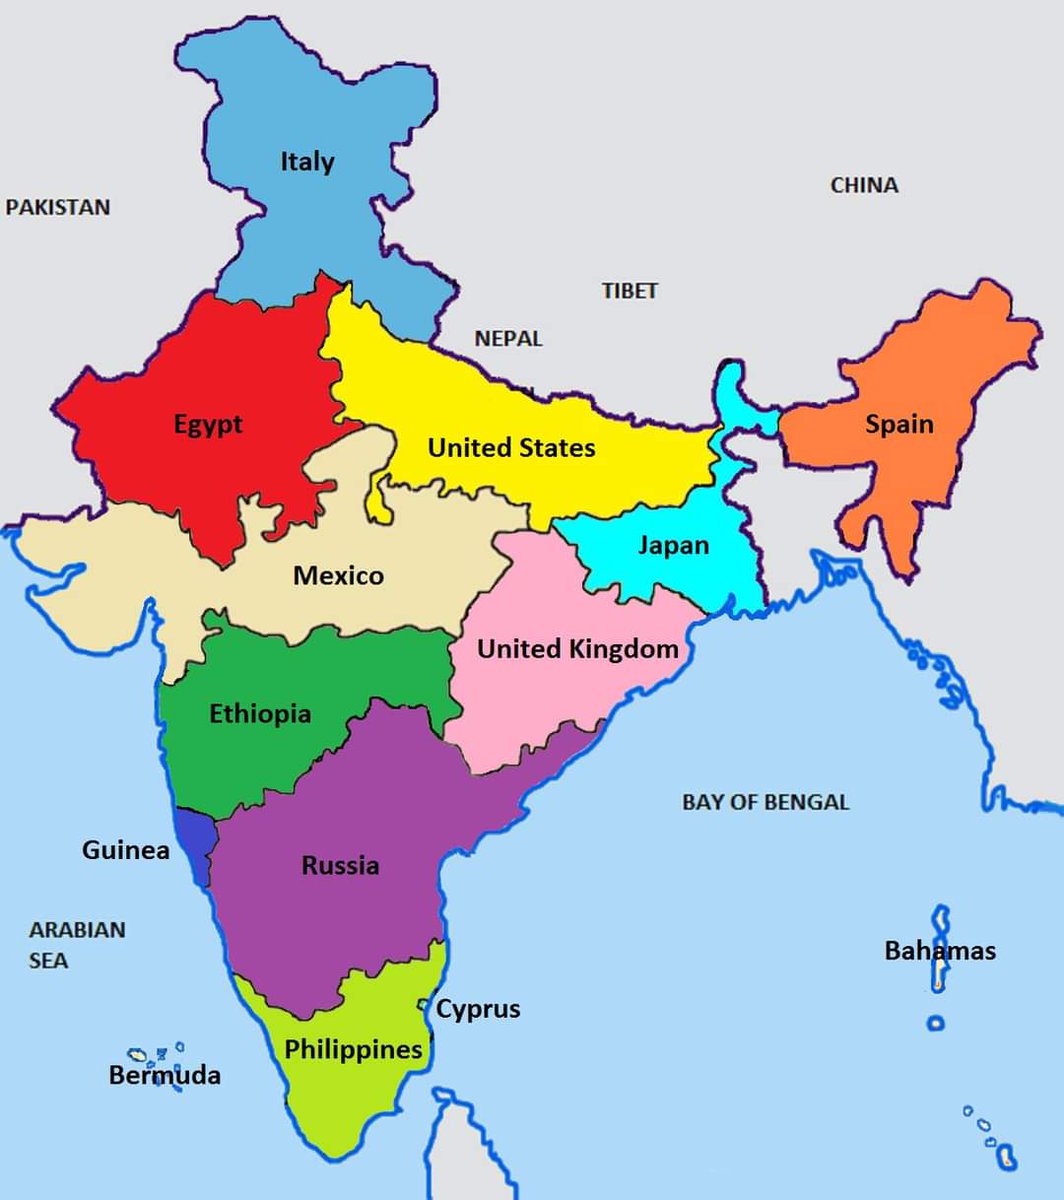 India's population compared to other countries